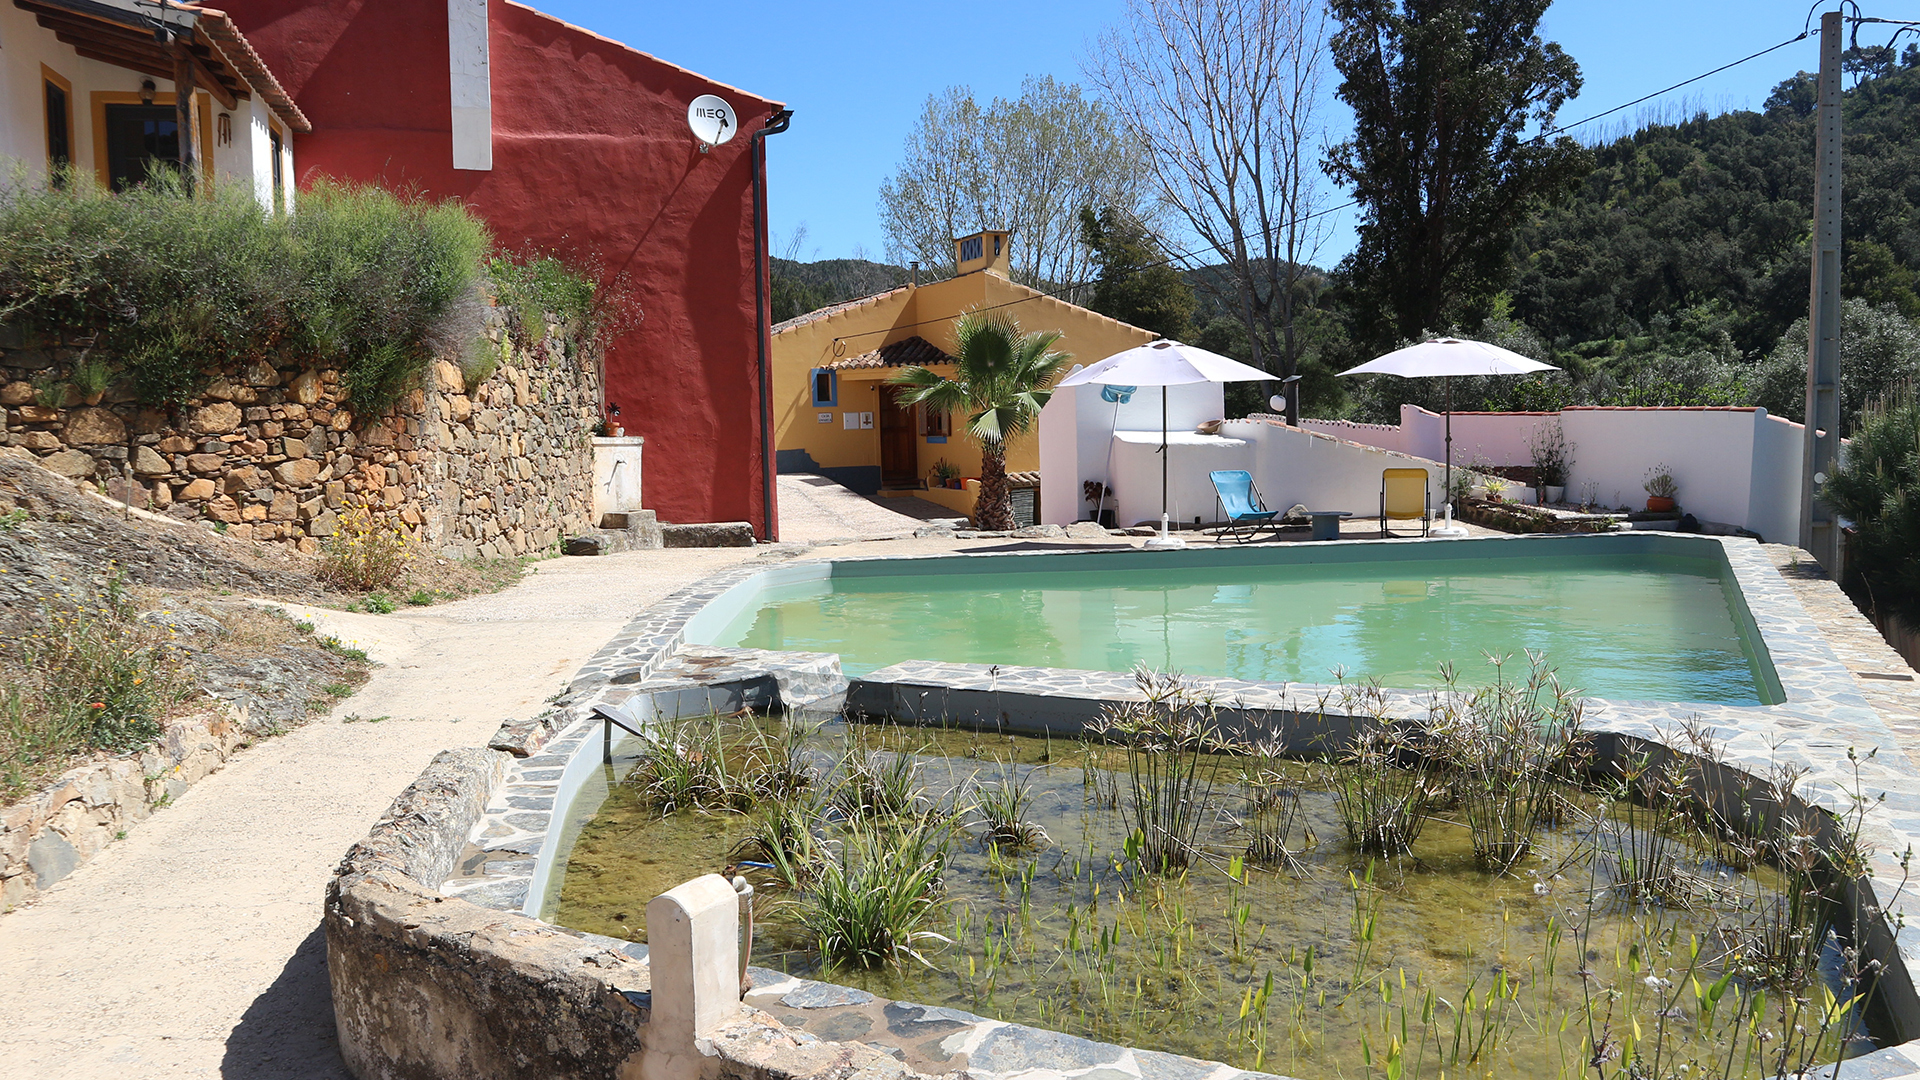 6 Bedroom Country Estate with natural pool in river valley near Monchique | LG2088 This enchanting rural estate of several buildings is located in a peaceful setting with a river running along one border. Perfect as a retreat or place for family and friends to relax.